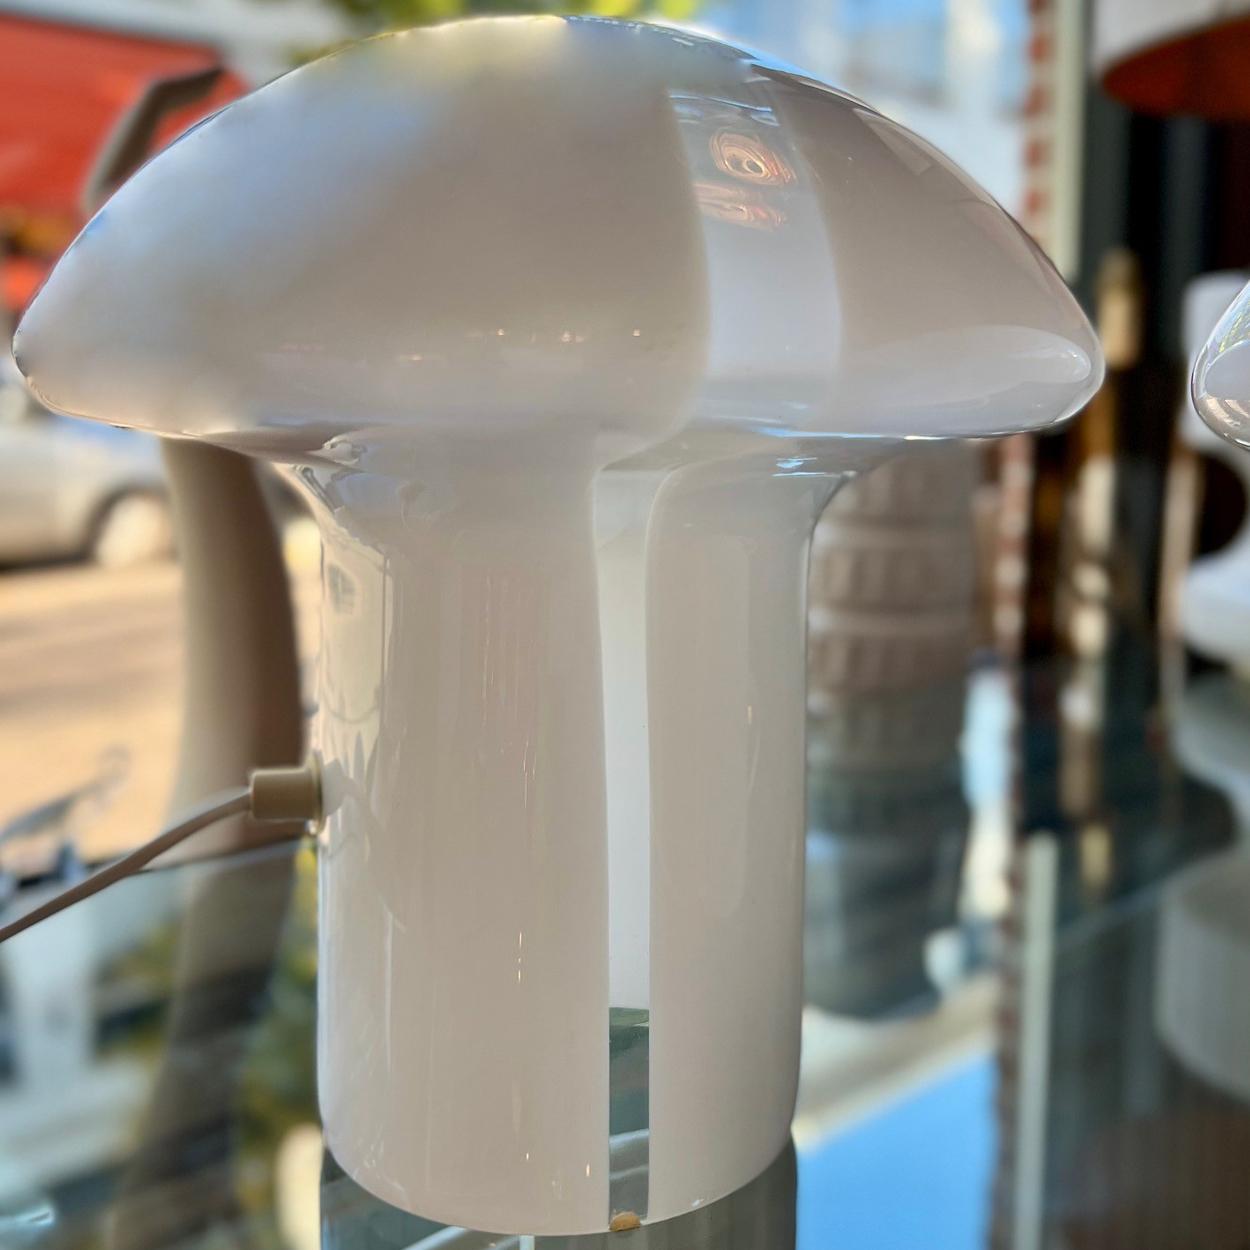 Pair of Timeless Murano glass table lamp in a rare and delicate mushroom shape. This piece was presumably designed by Luciano Vistosi or Gino Vistosi in the early 1970s. Its simple and elegant design makes this lamp match perfectly to any interior